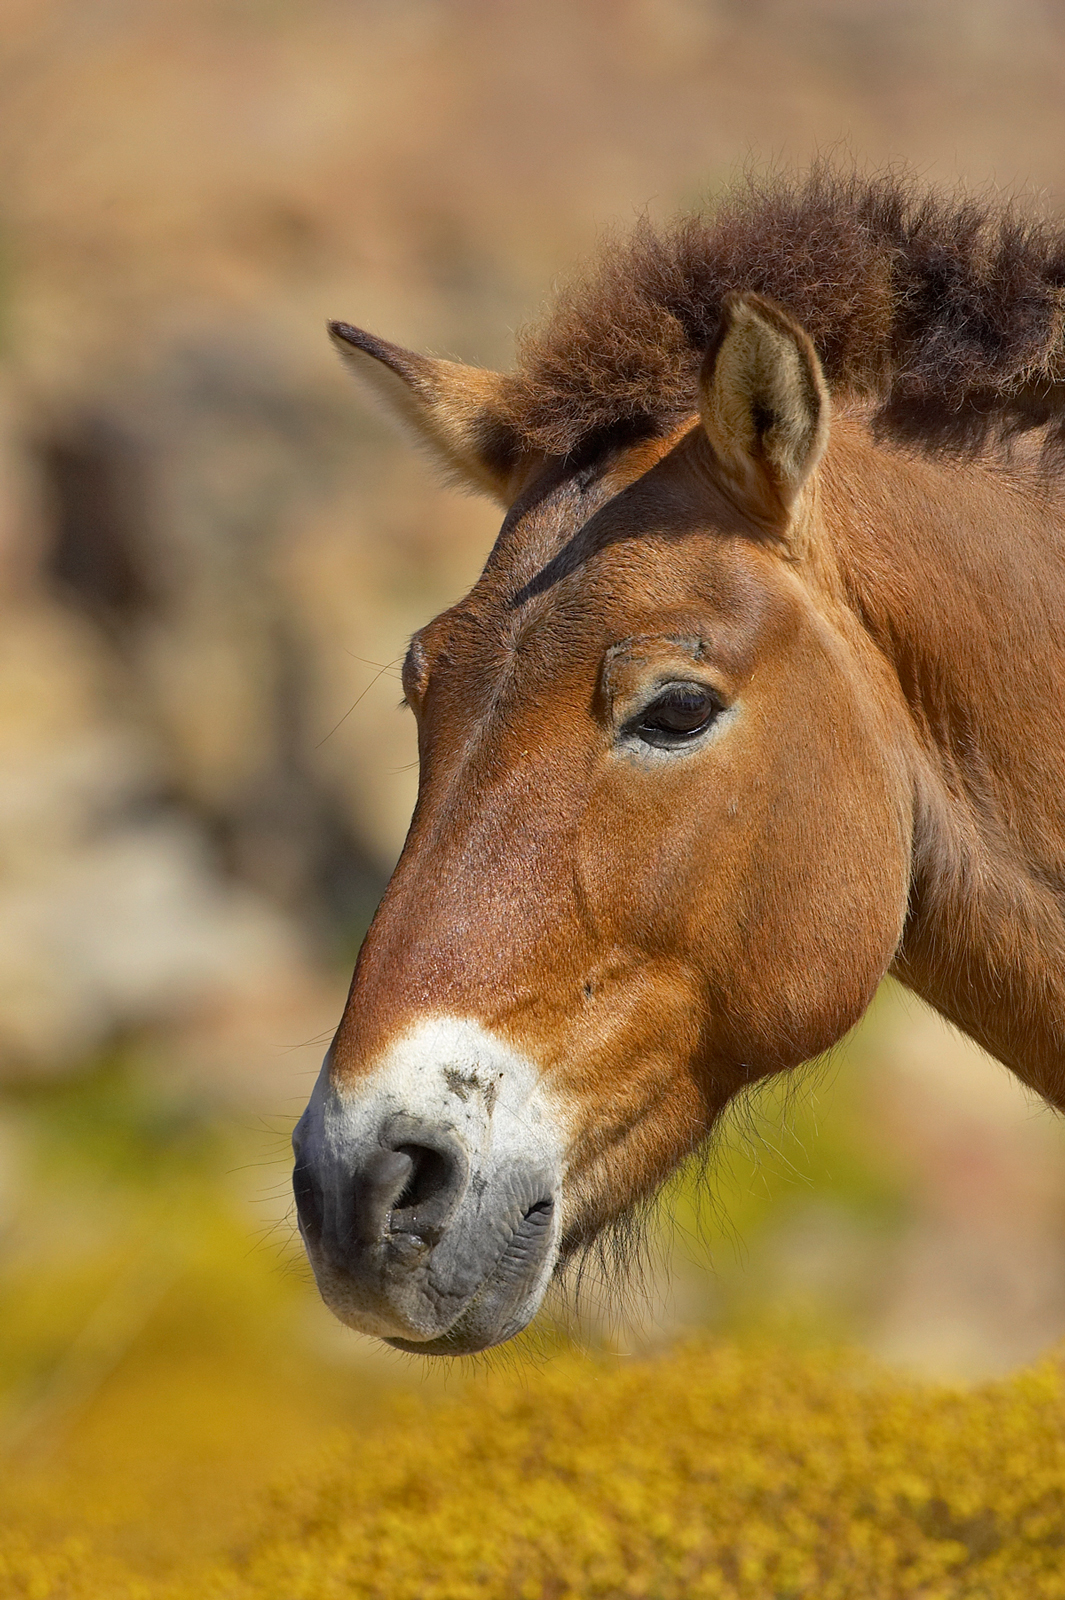 With punk rock style, Przewalski's horses grow thick, warm coats for the winter, complete with long beards and neck hair. These Mongolian wild horses rock the mohawk without the teenage angst.